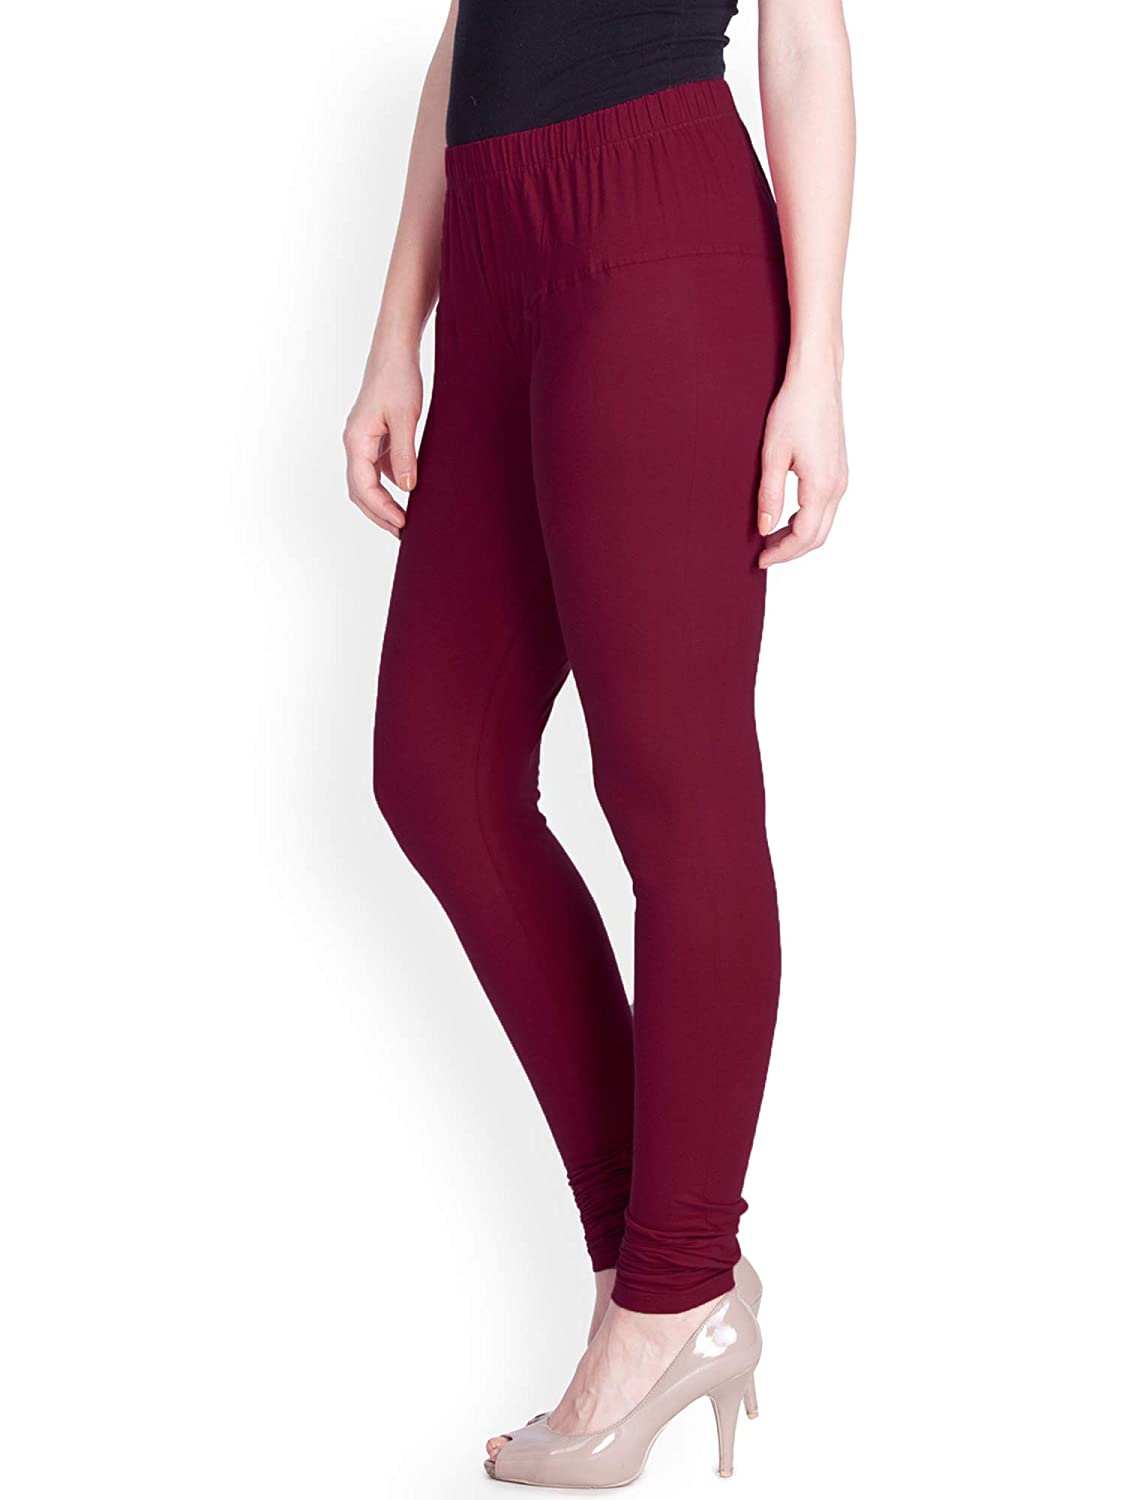 Womens Full Length Cotton Leggings All Sizes and Colors - High